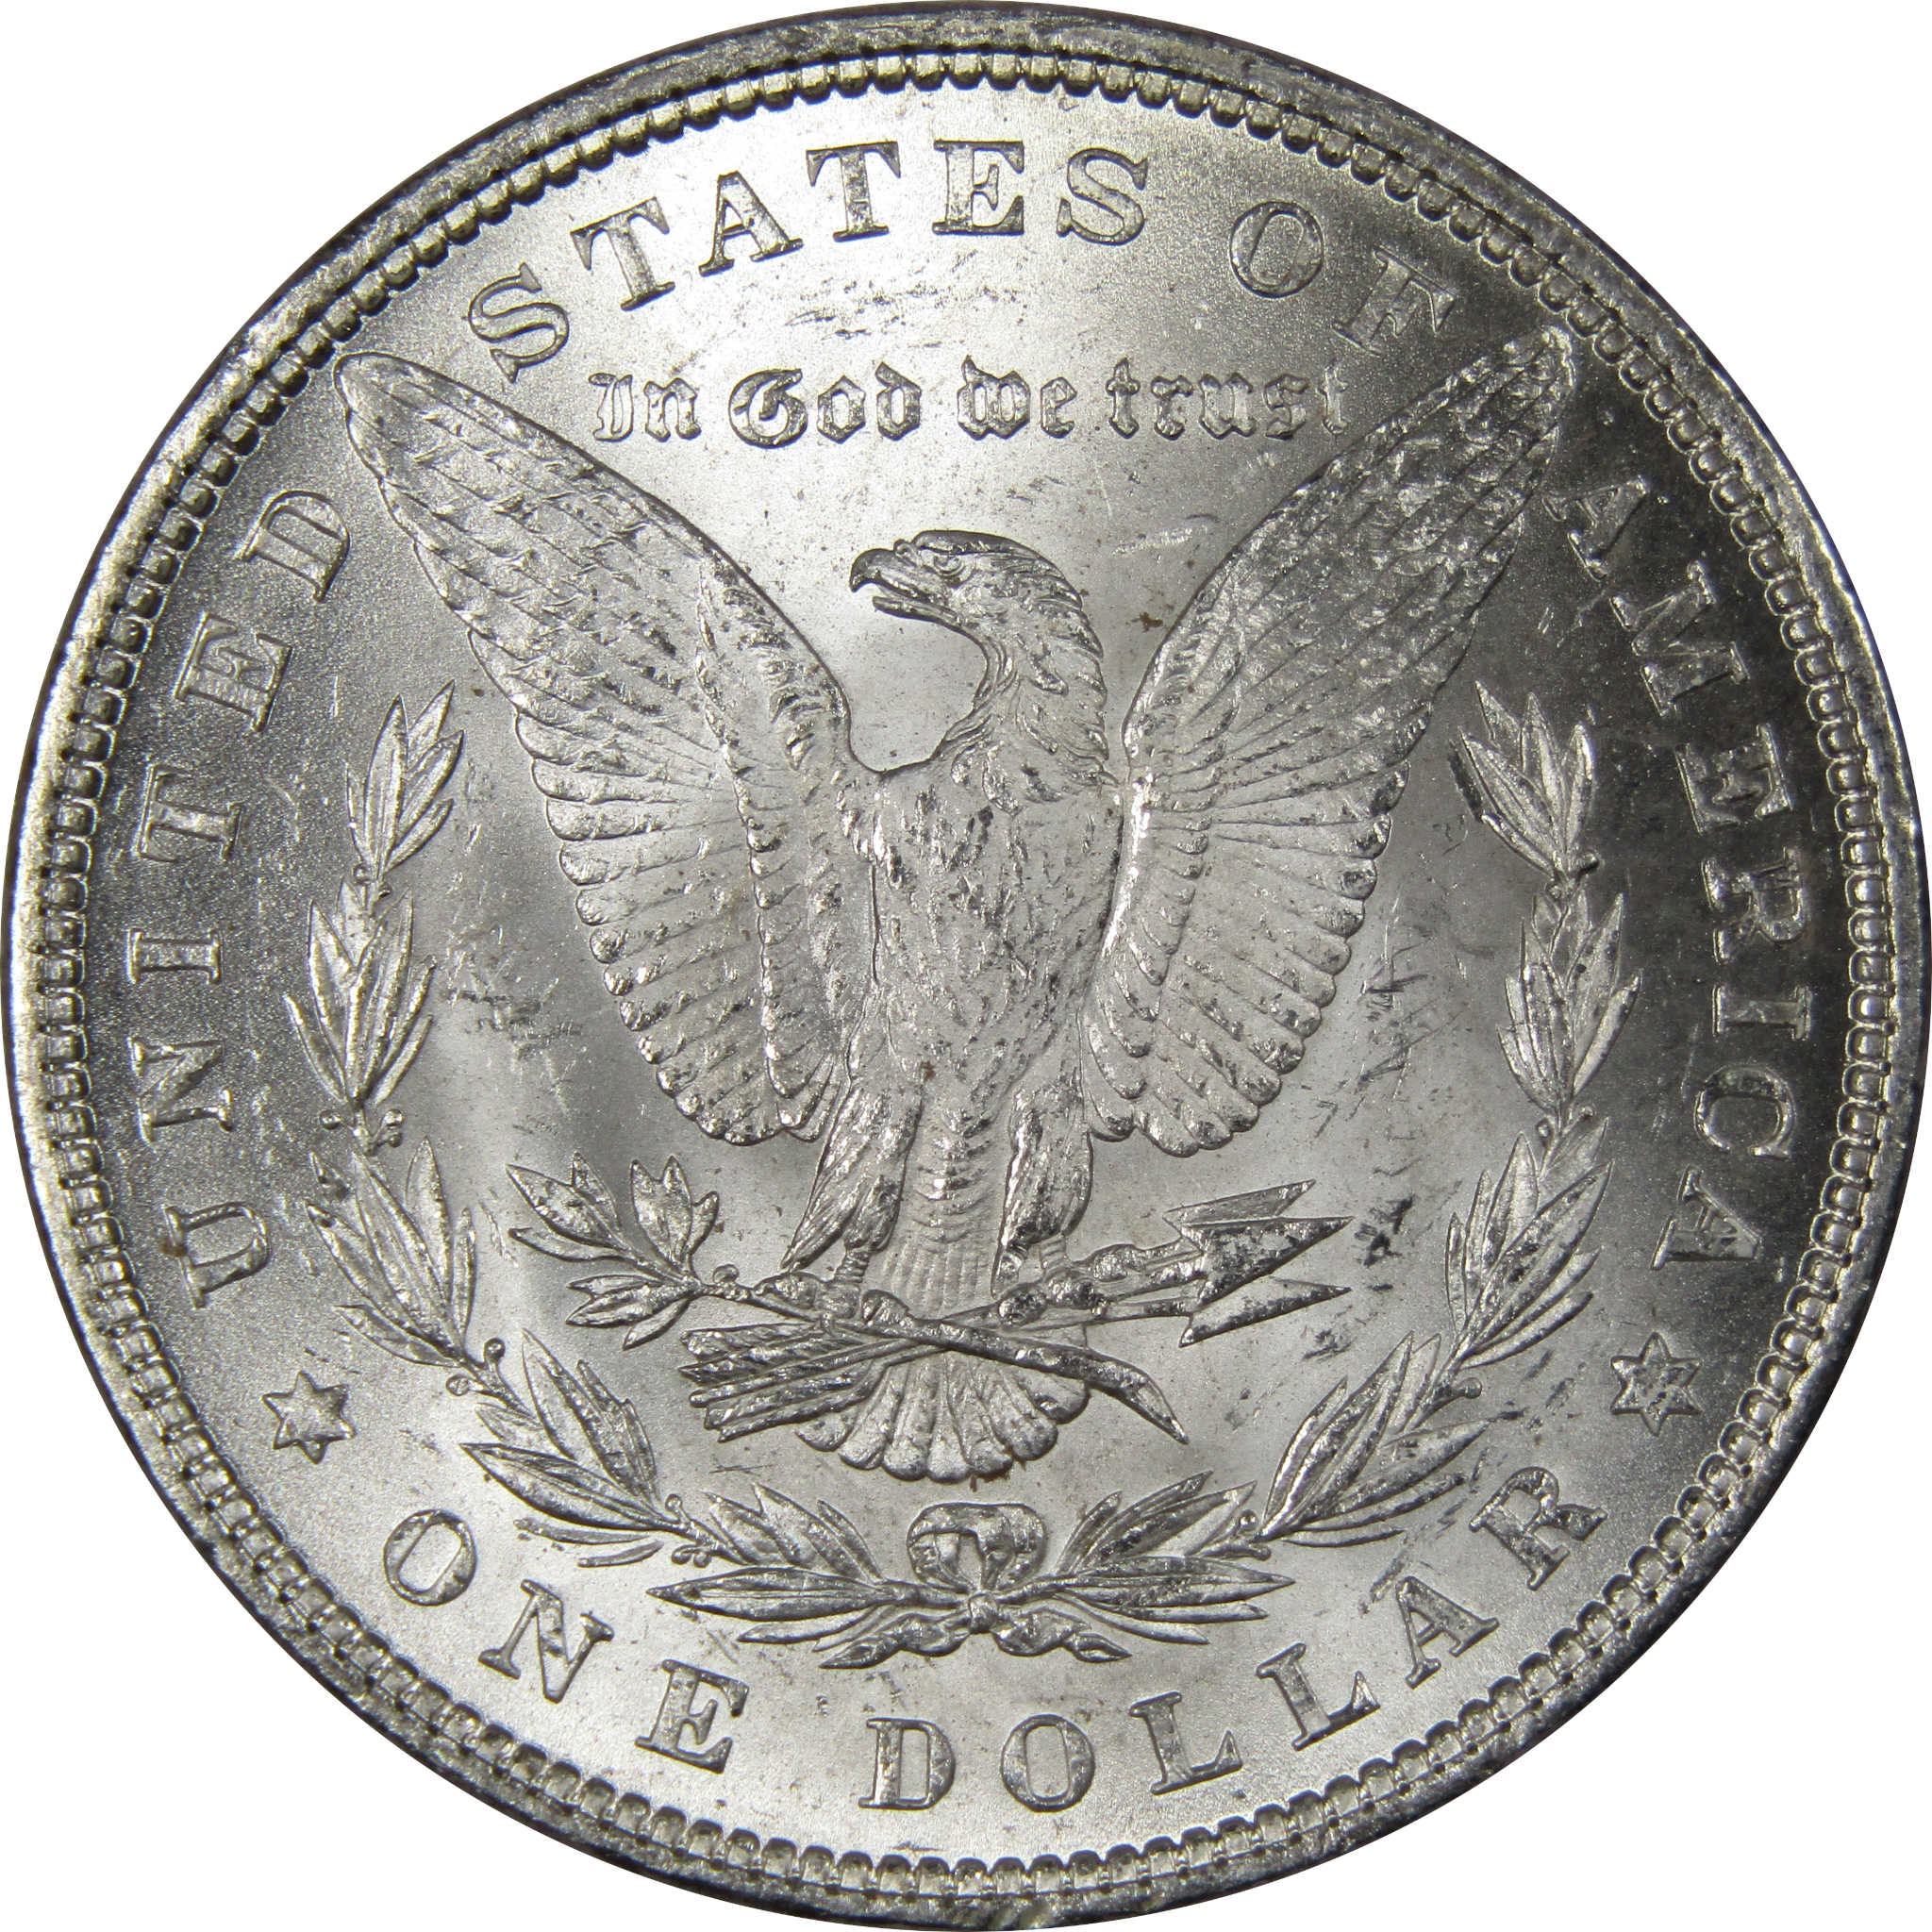 1882 Morgan Dollar BU Uncirculated Mint State 90% Silver SKU:IPC9718 - Morgan coin - Morgan silver dollar - Morgan silver dollar for sale - Profile Coins &amp; Collectibles